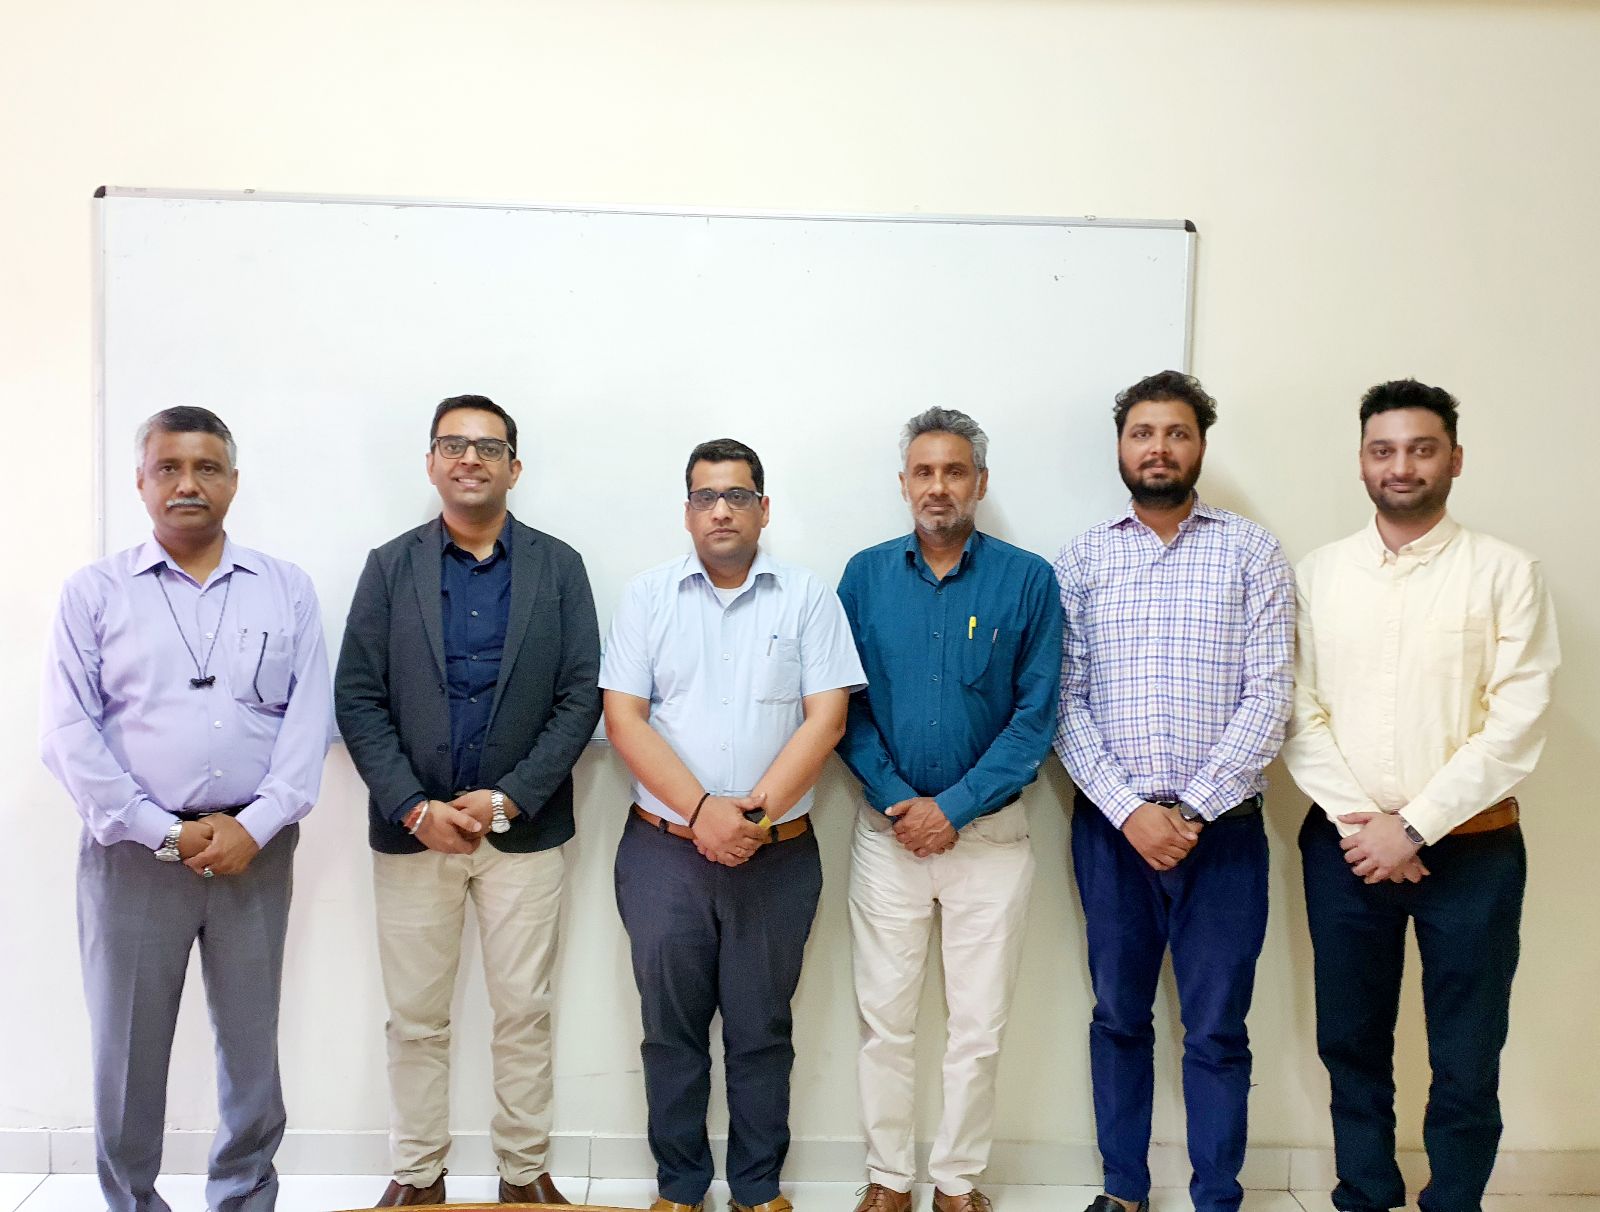 CollPoll team meets leadership team of Baba Farid Group of Institutions